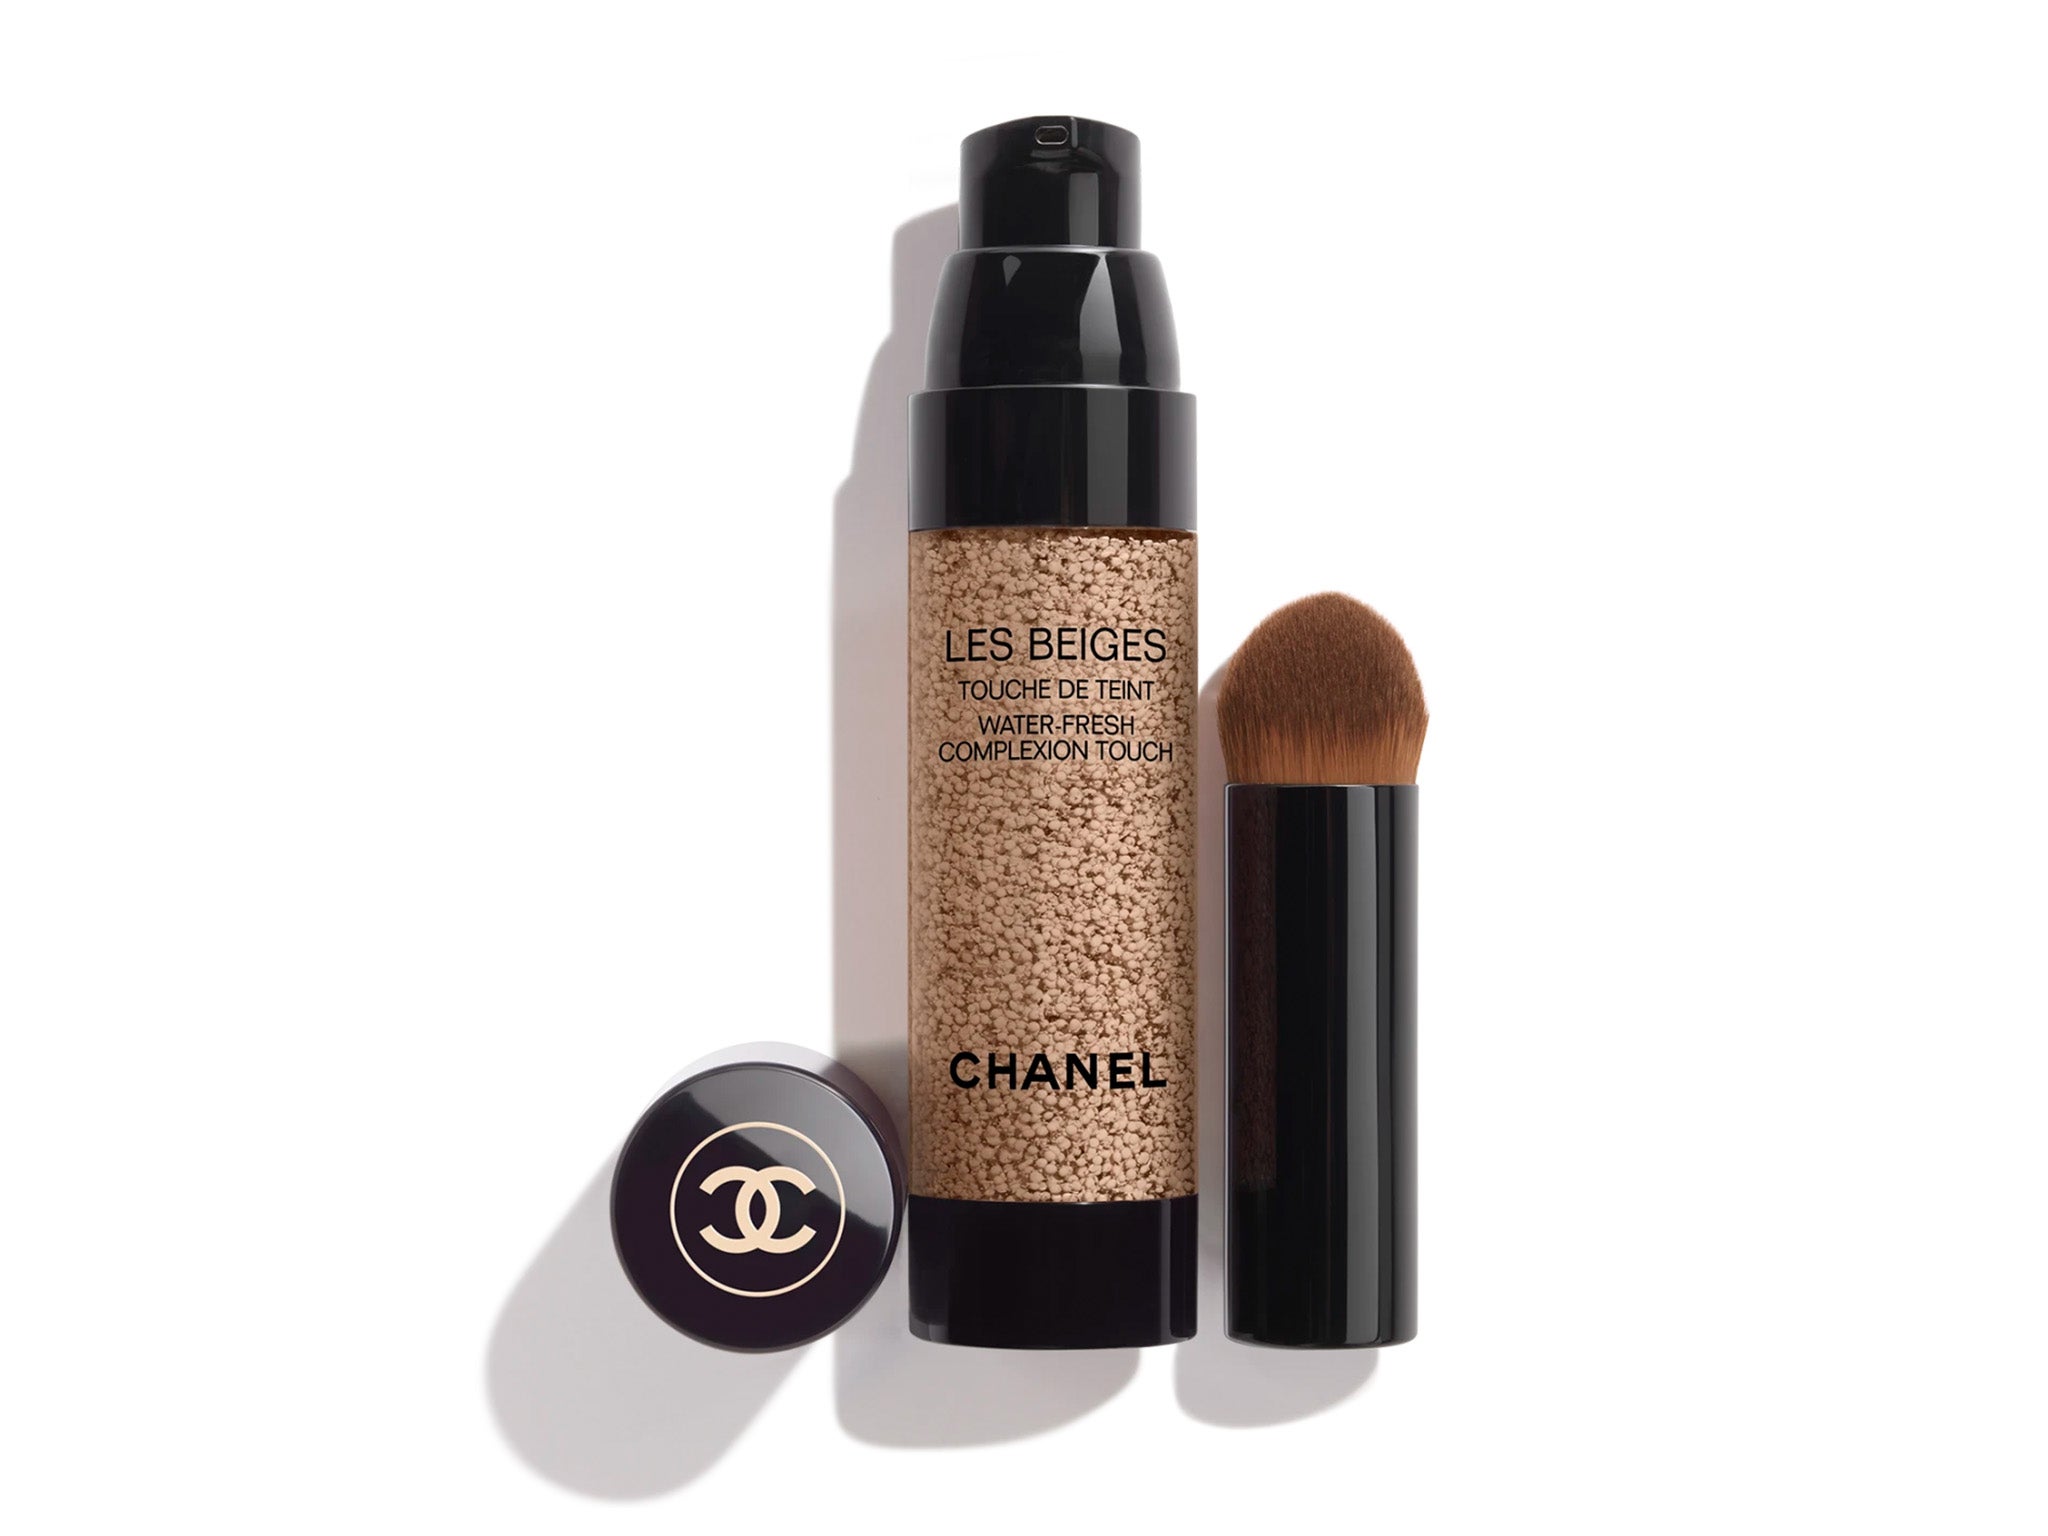 Chanel Les Beiges Sheer Healthy Glow Highlighting Fluid ingredients  (Explained)